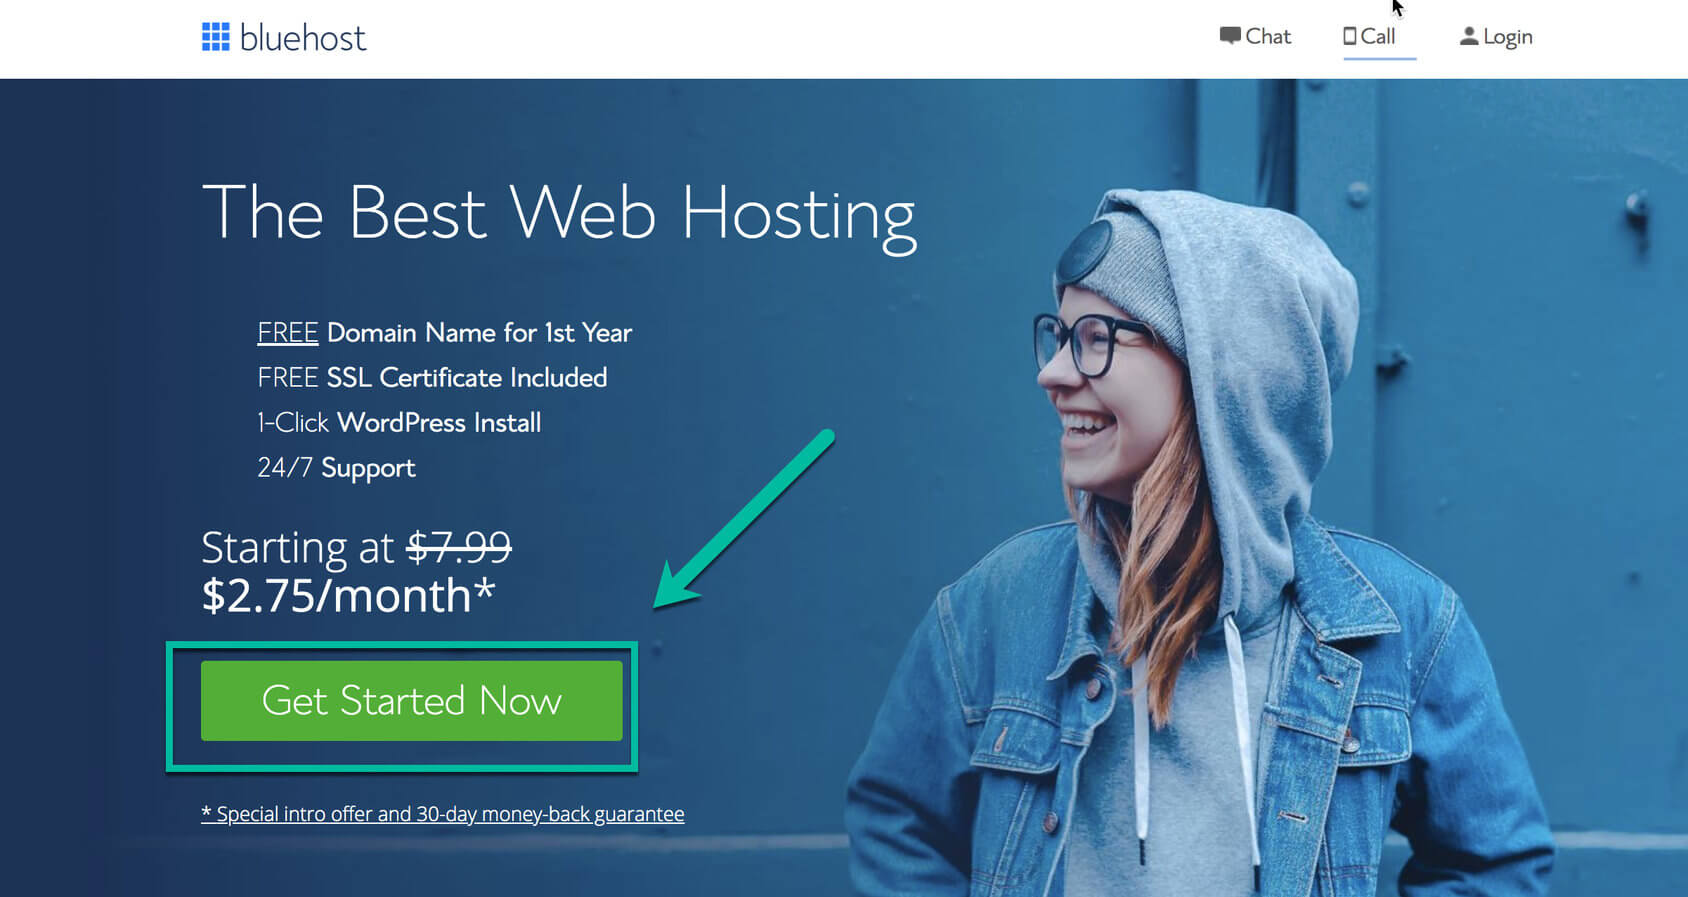 bluehost get started page